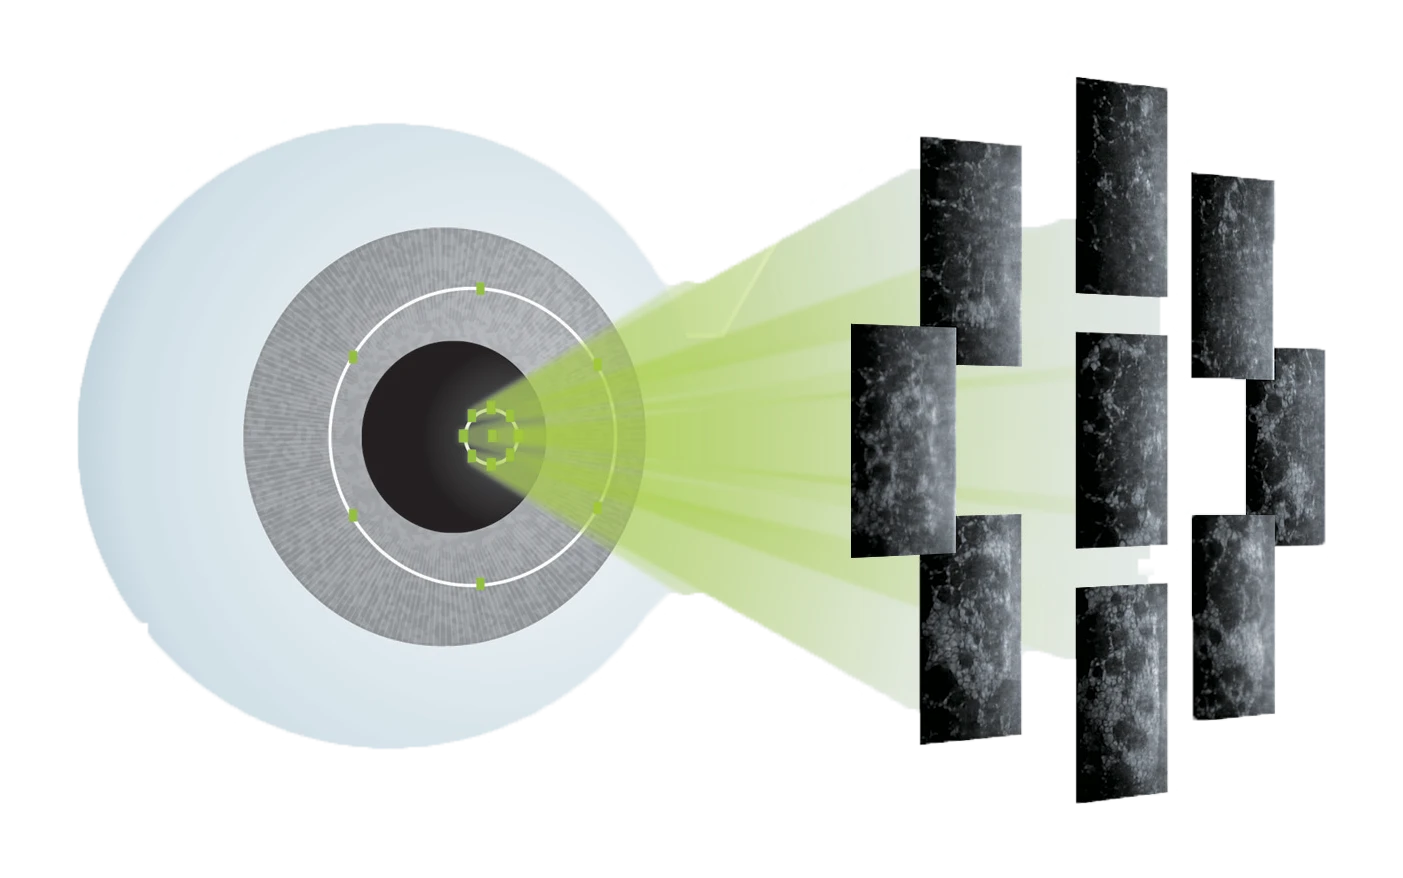 A Diagram Showcasing A Series Of Concentric Circles On The Left Emitting Green Beams Towards Rectangular Panels Branded With Nidek On The Right. The Panels Display Black And White Marbled Textures And Are Arranged In A Staggered, Grid-Like Pattern.